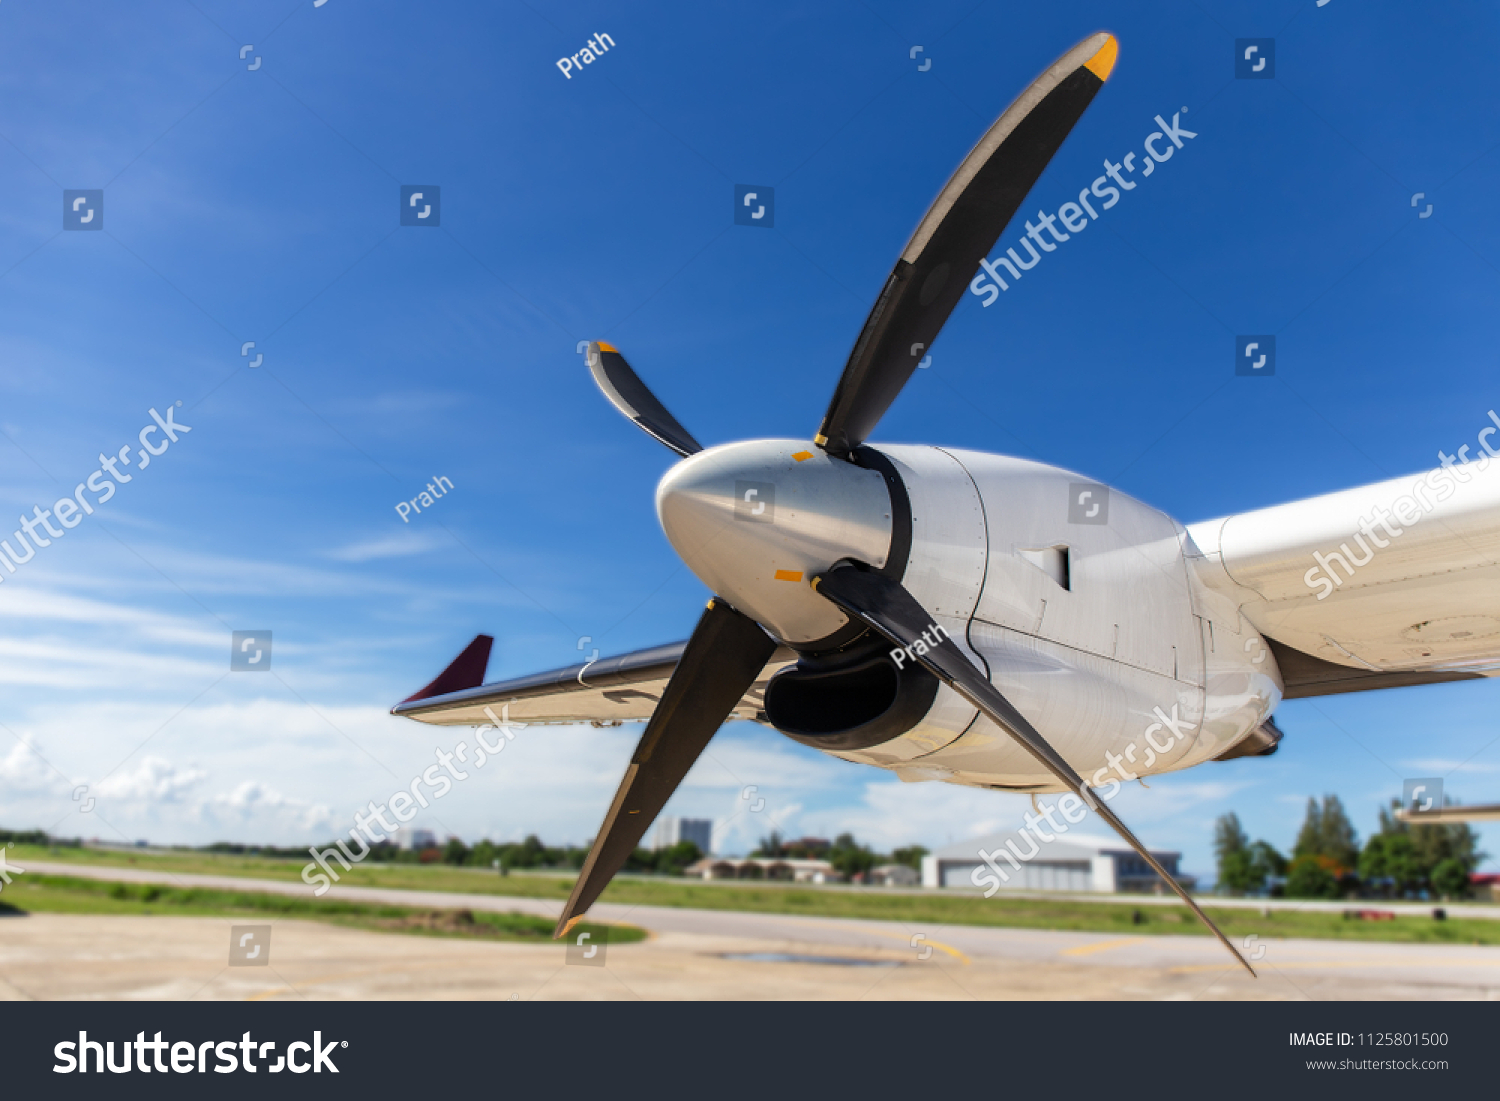 aircraft propeller blade and turboprop engines with airfield, blue sky background and copy space #1125801500